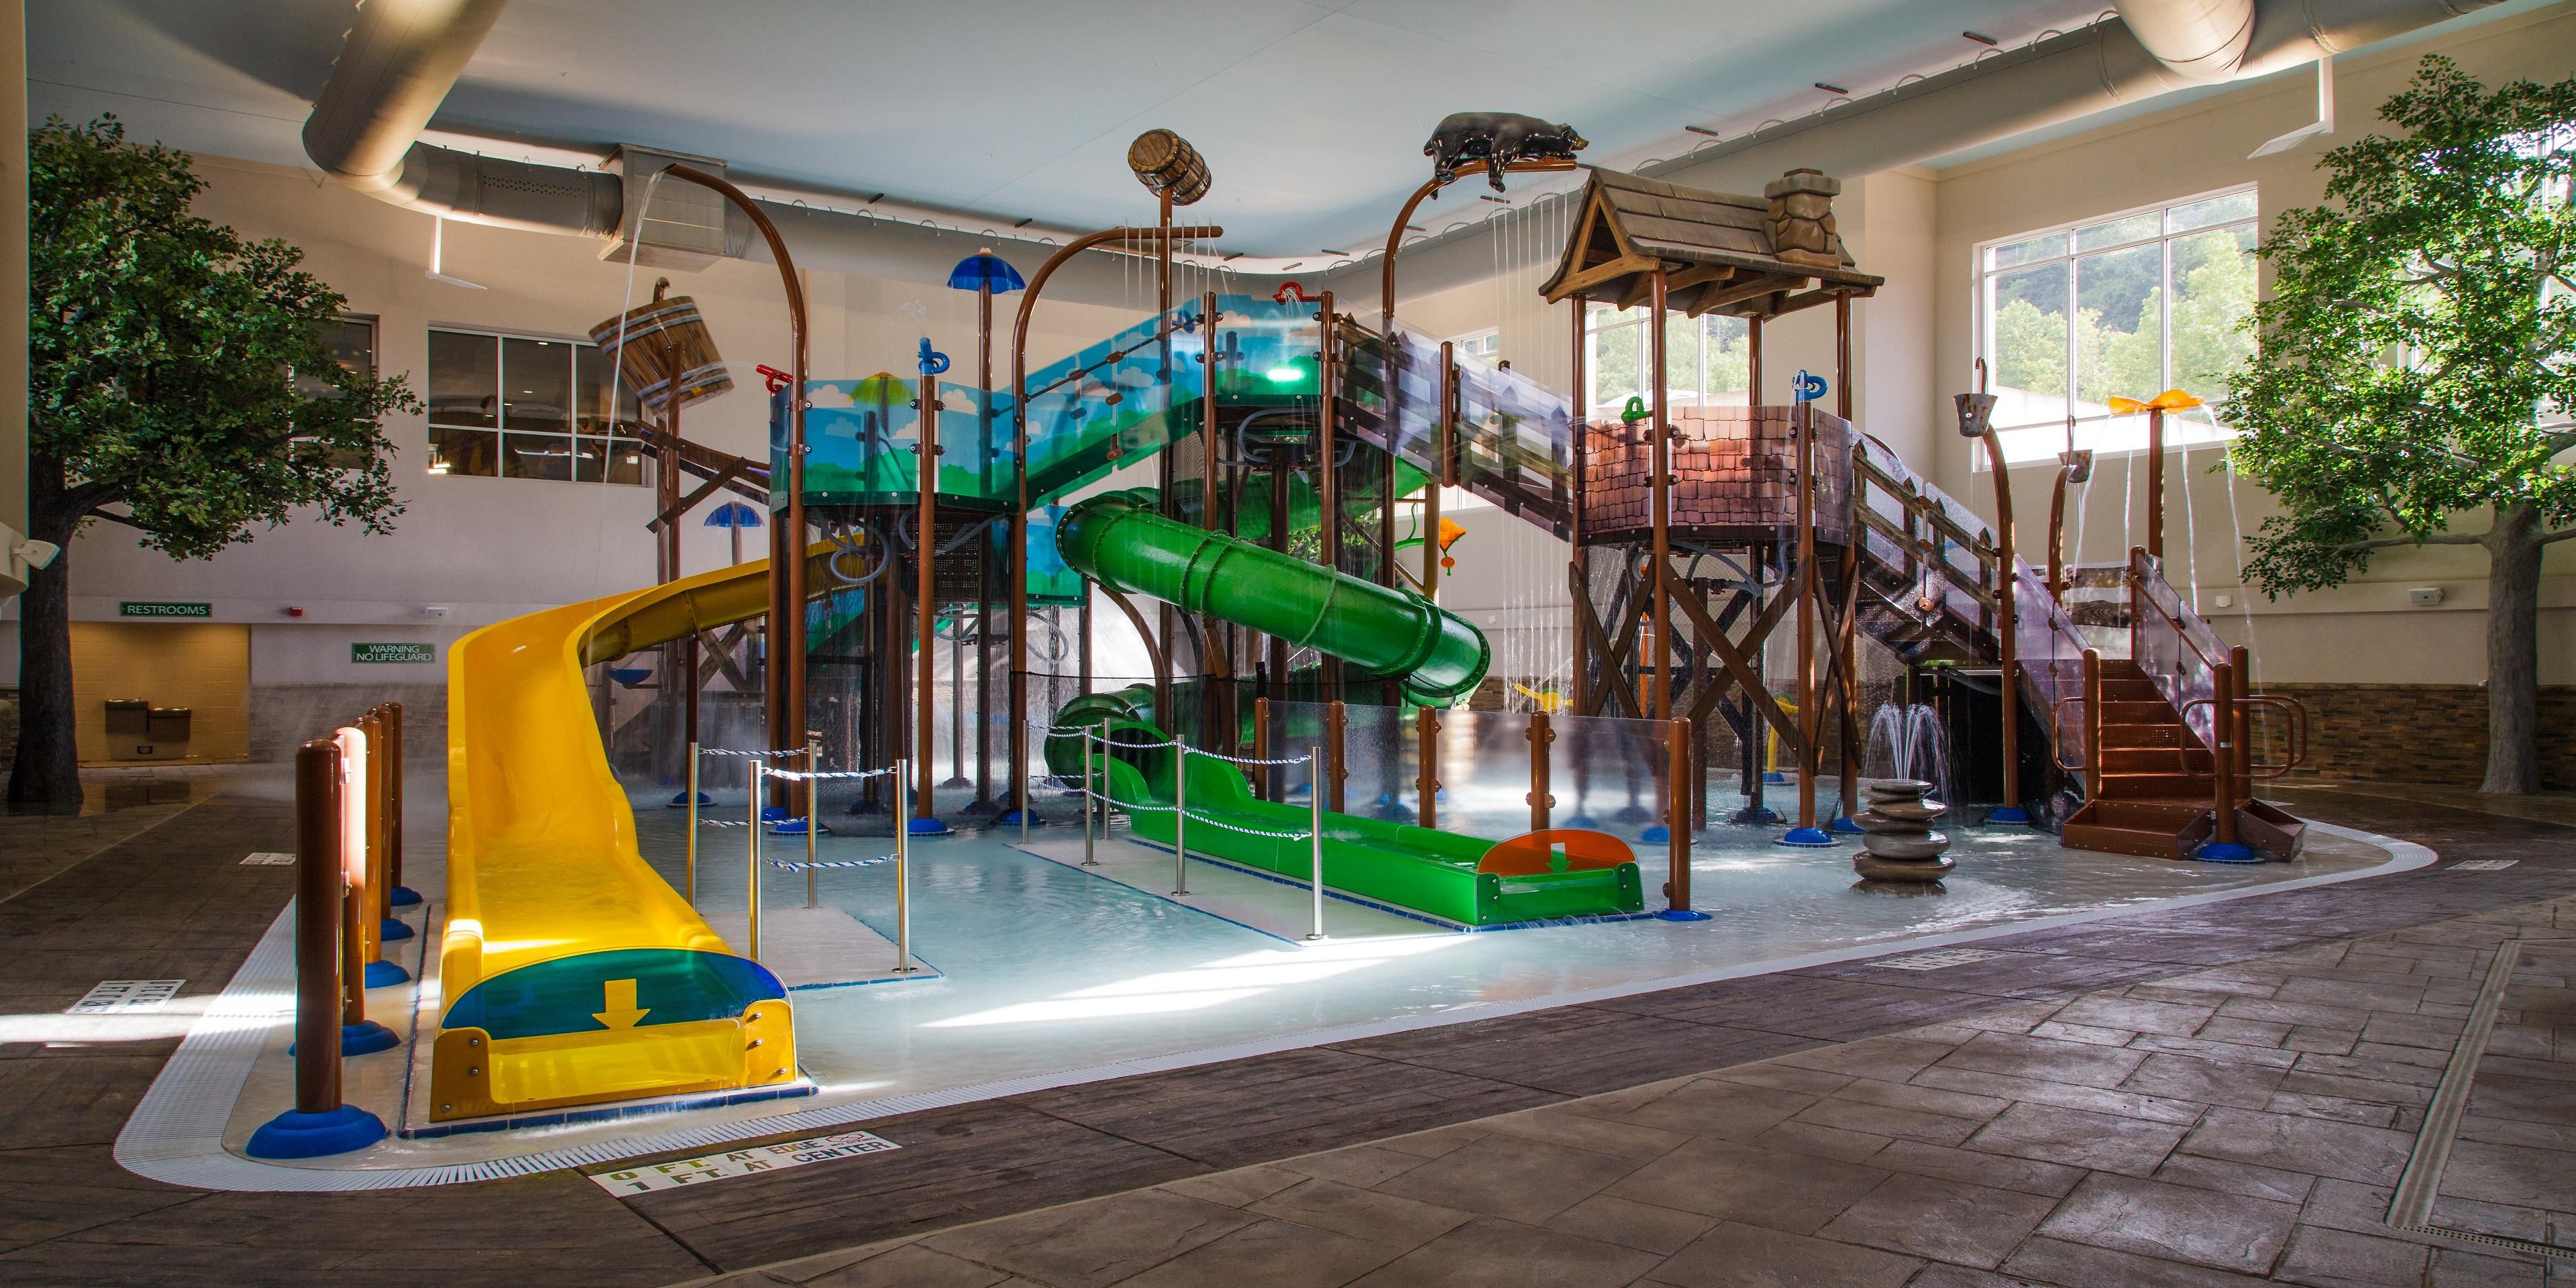 Enjoy our indoor all weather water-park including swimming pool, slides and kiddie splash pad.